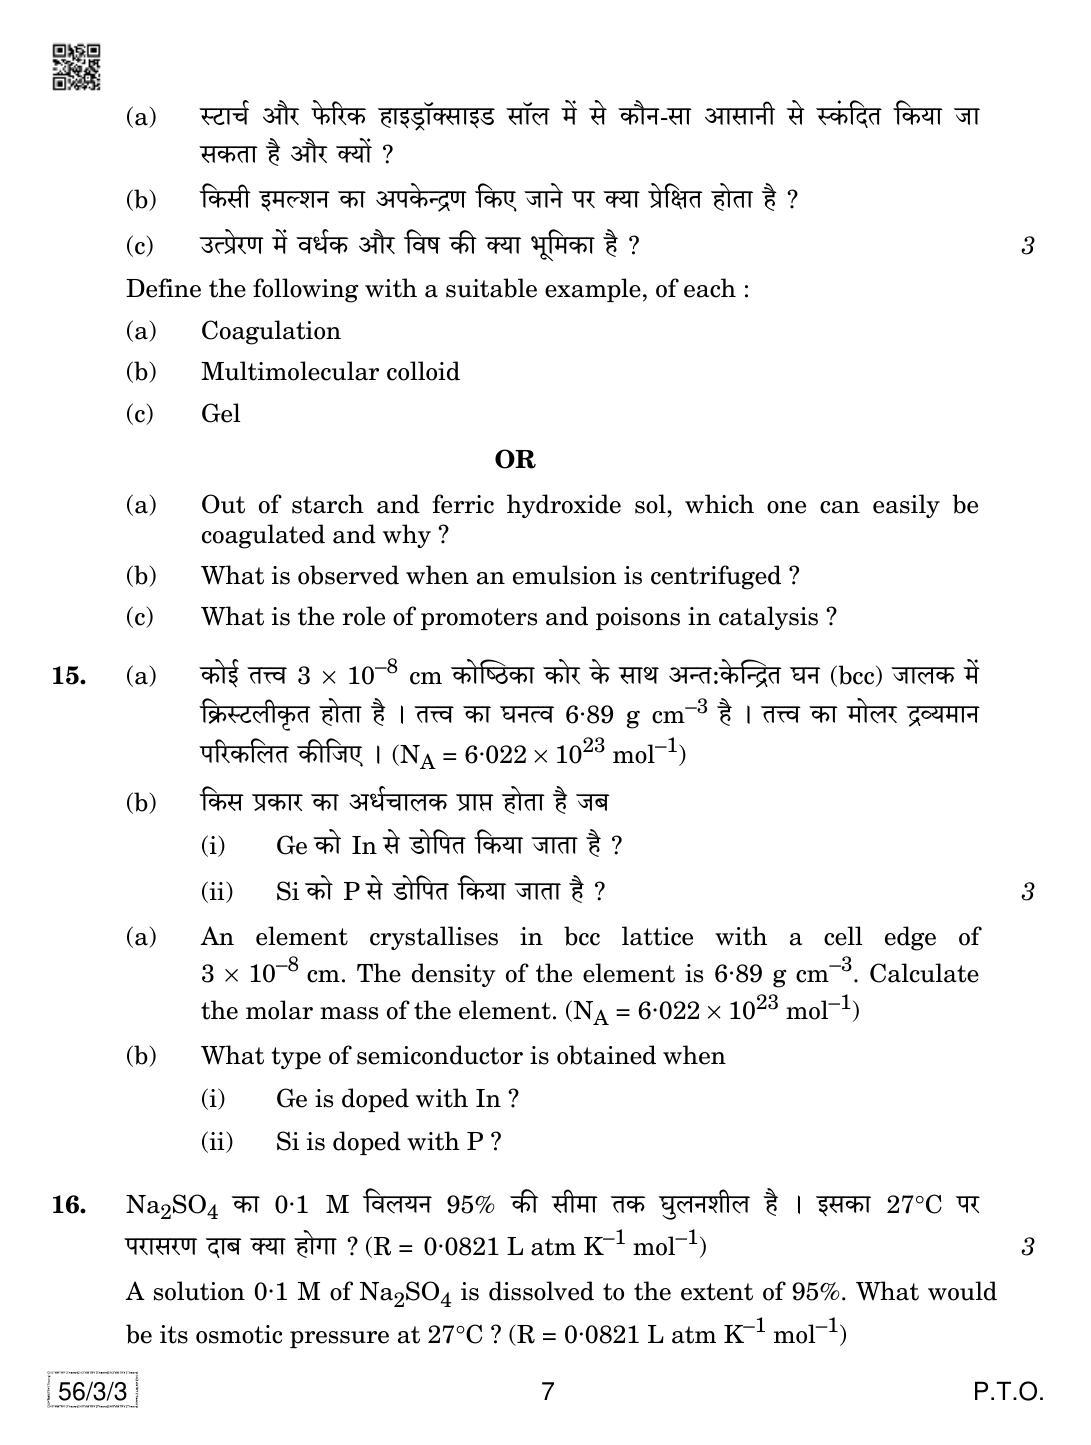 CBSE Class 12 56-3-3 Chemistry 2019 Question Paper - Page 7